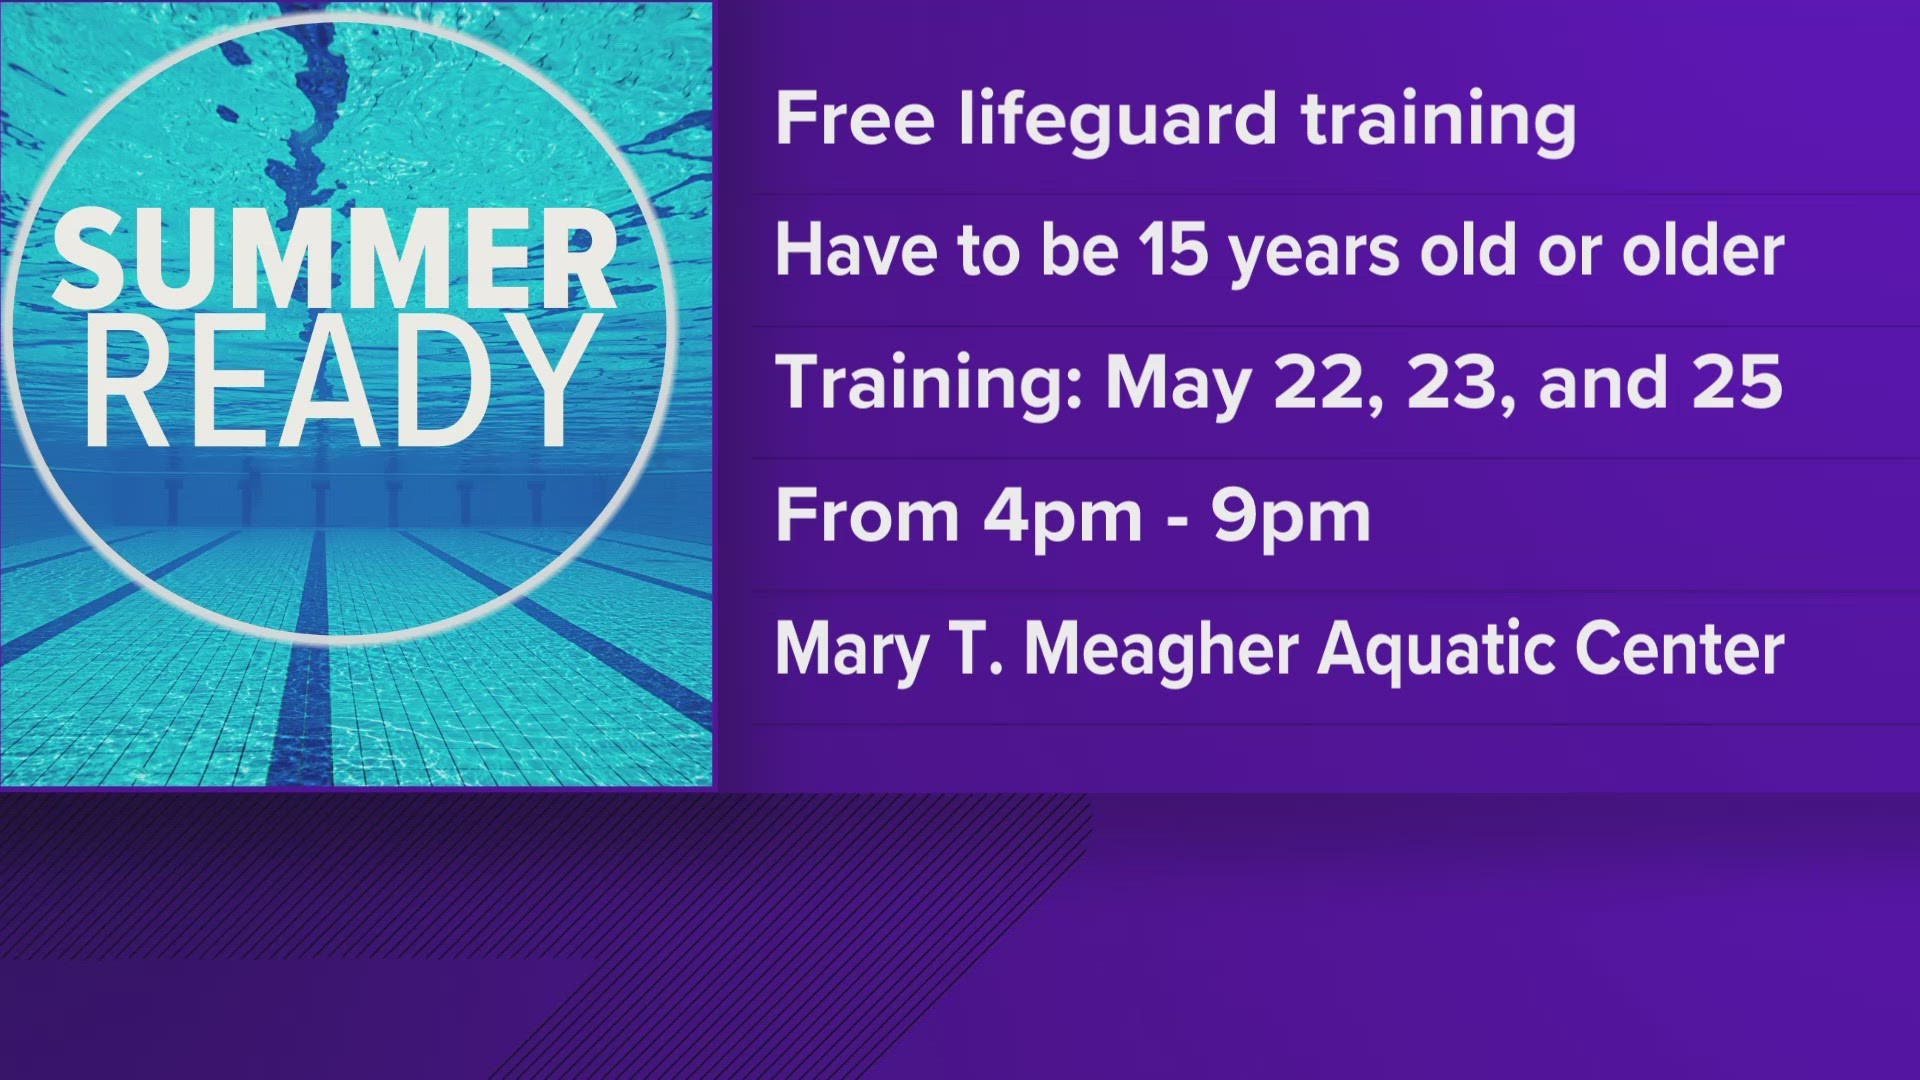 The Parks and Recreation department is looking for good people to train as lifeguards to staff their pools around Louisville this summer.